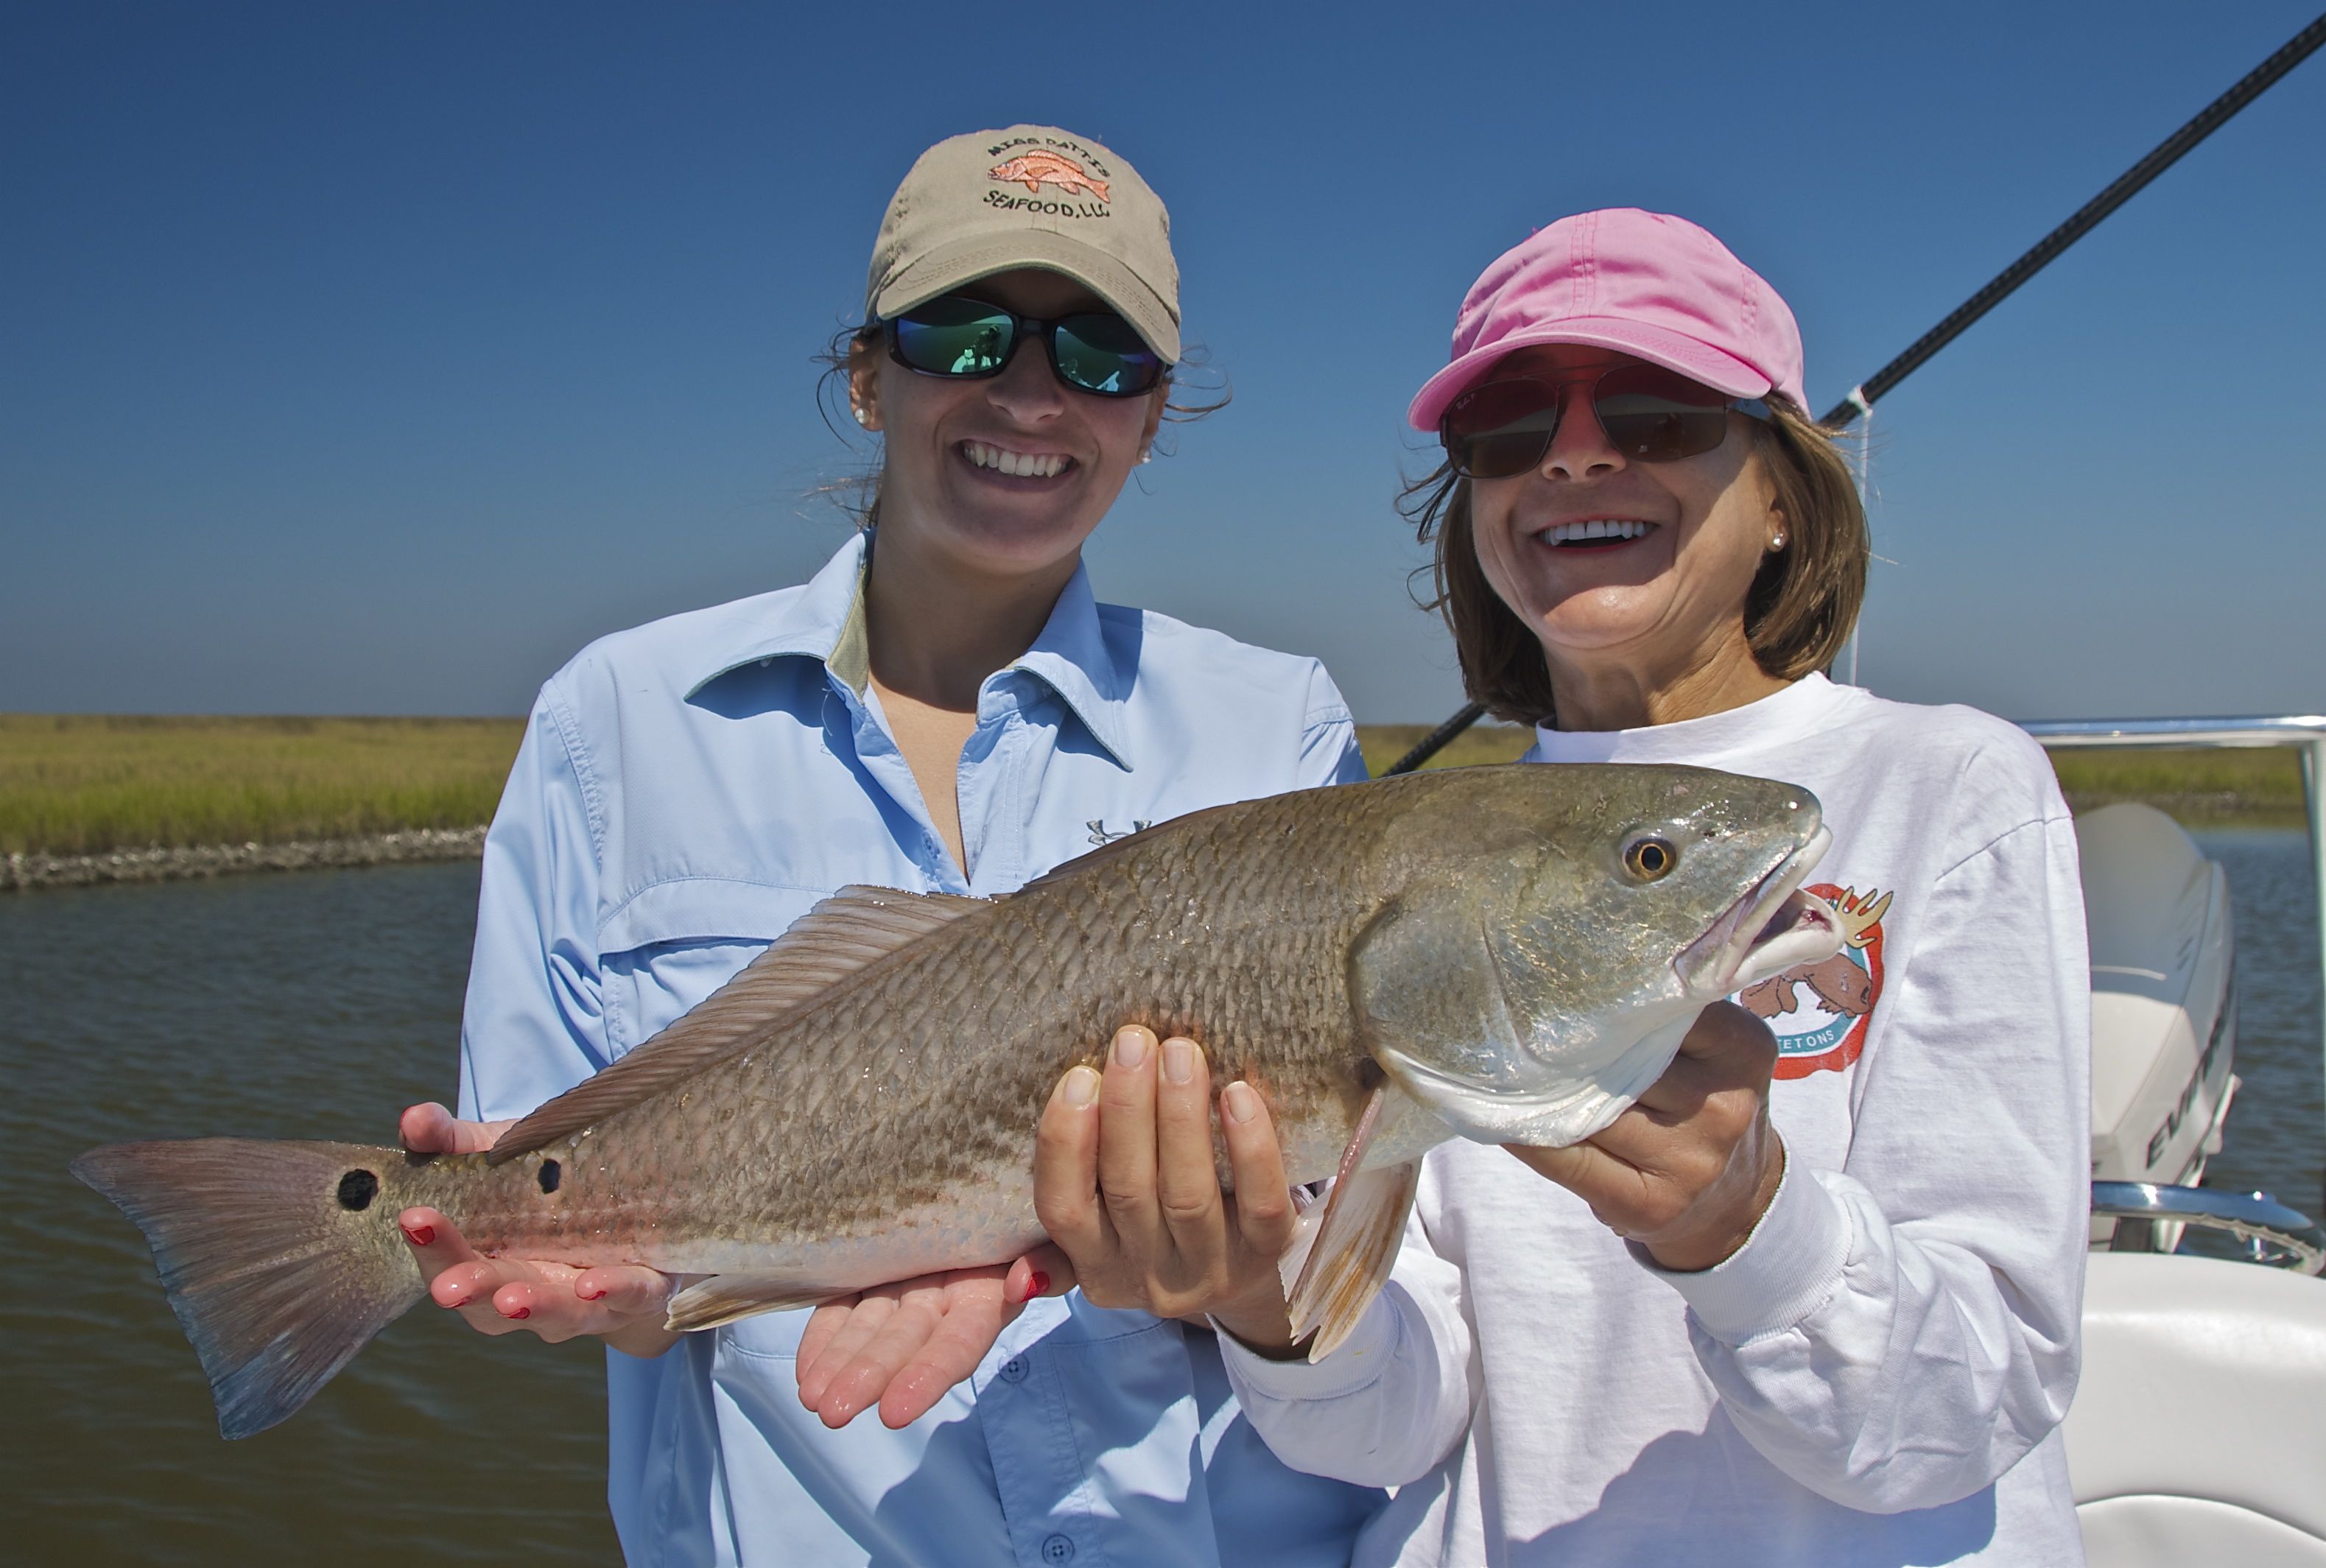 Two women are delighted after catching a redfish